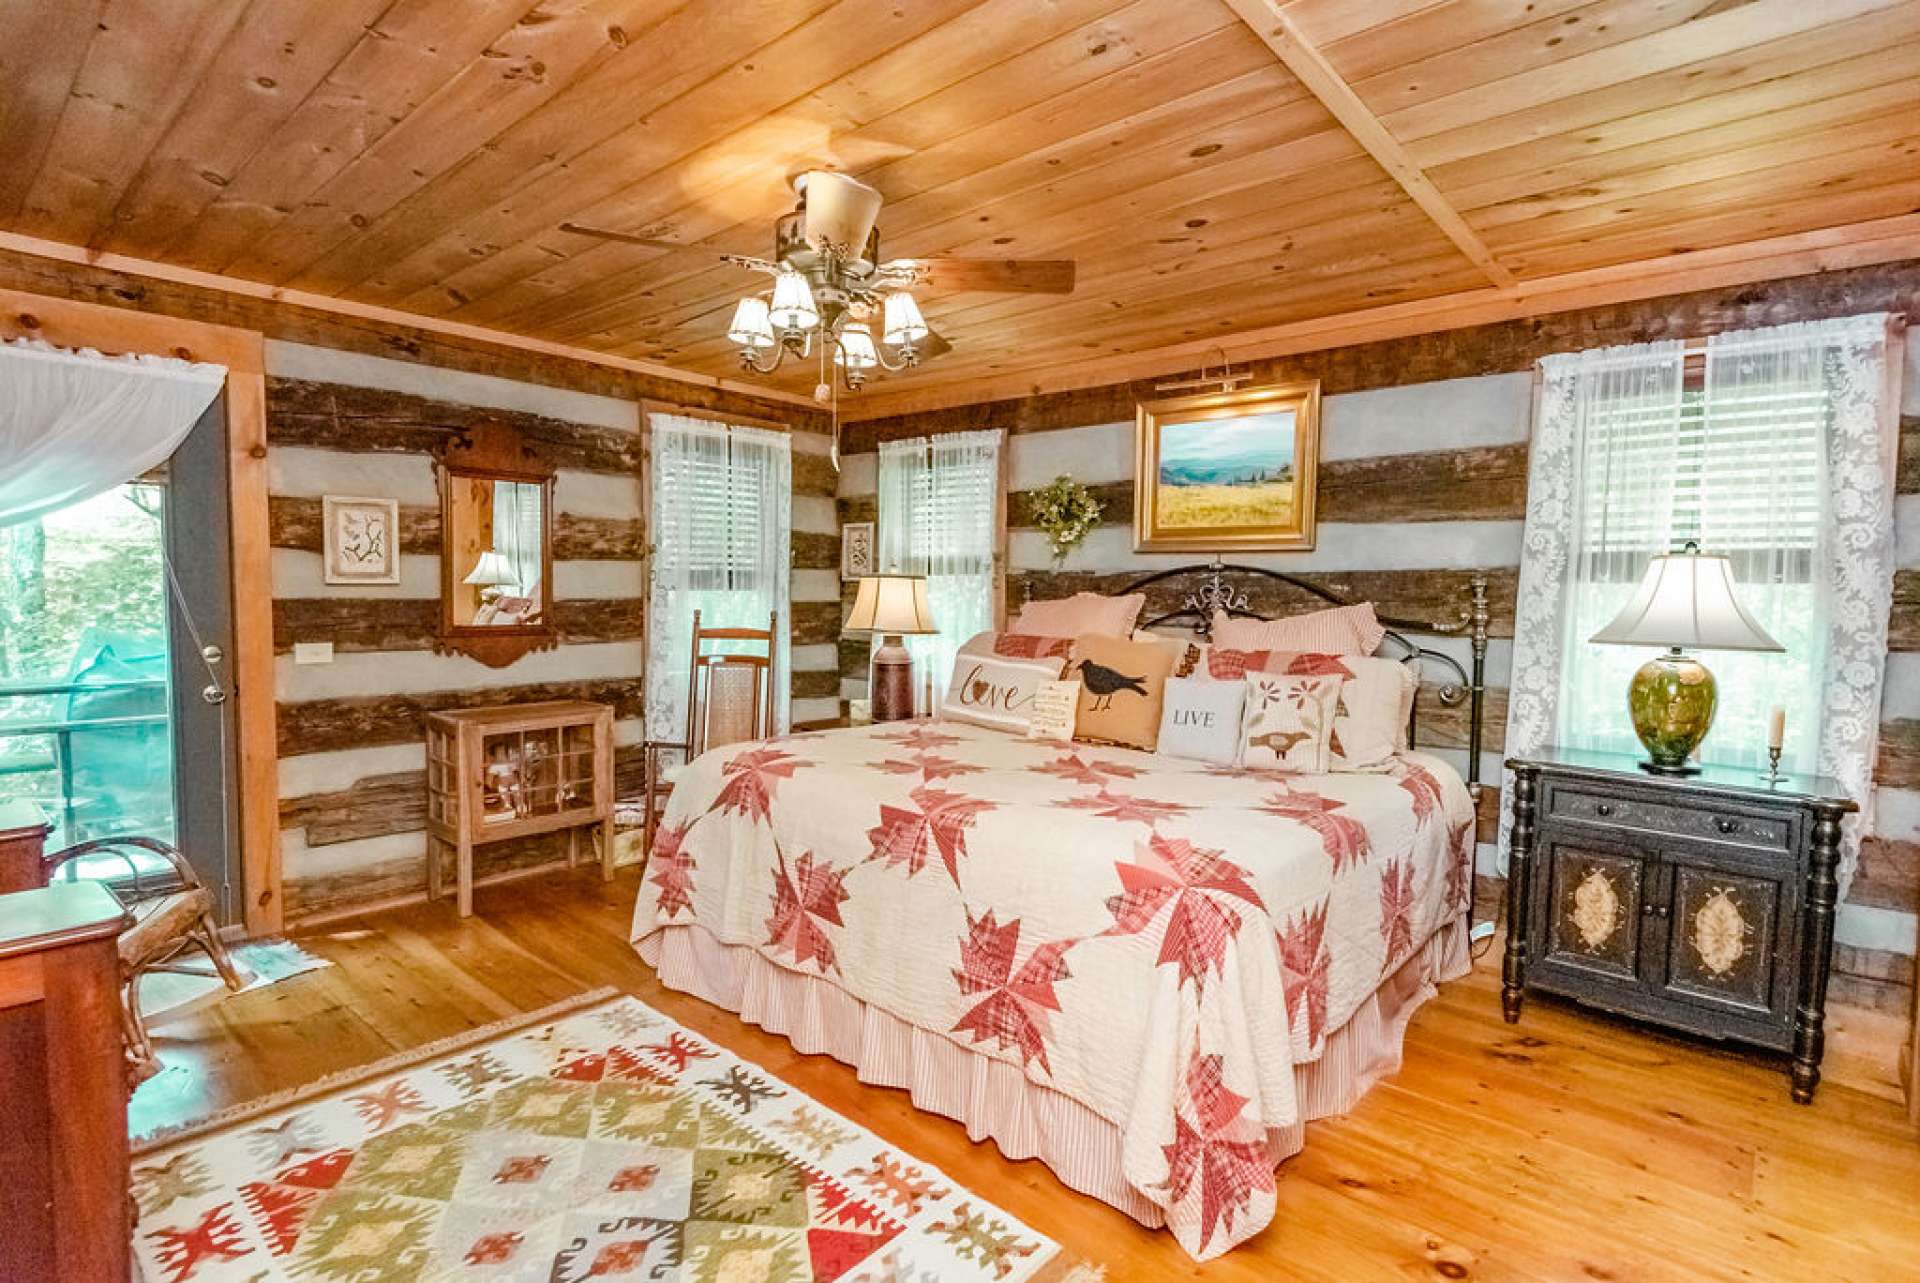 Spacious master suite where you and your "cherished one" can be together and reminisce over the days activities and plans for tomorrow's excitement.